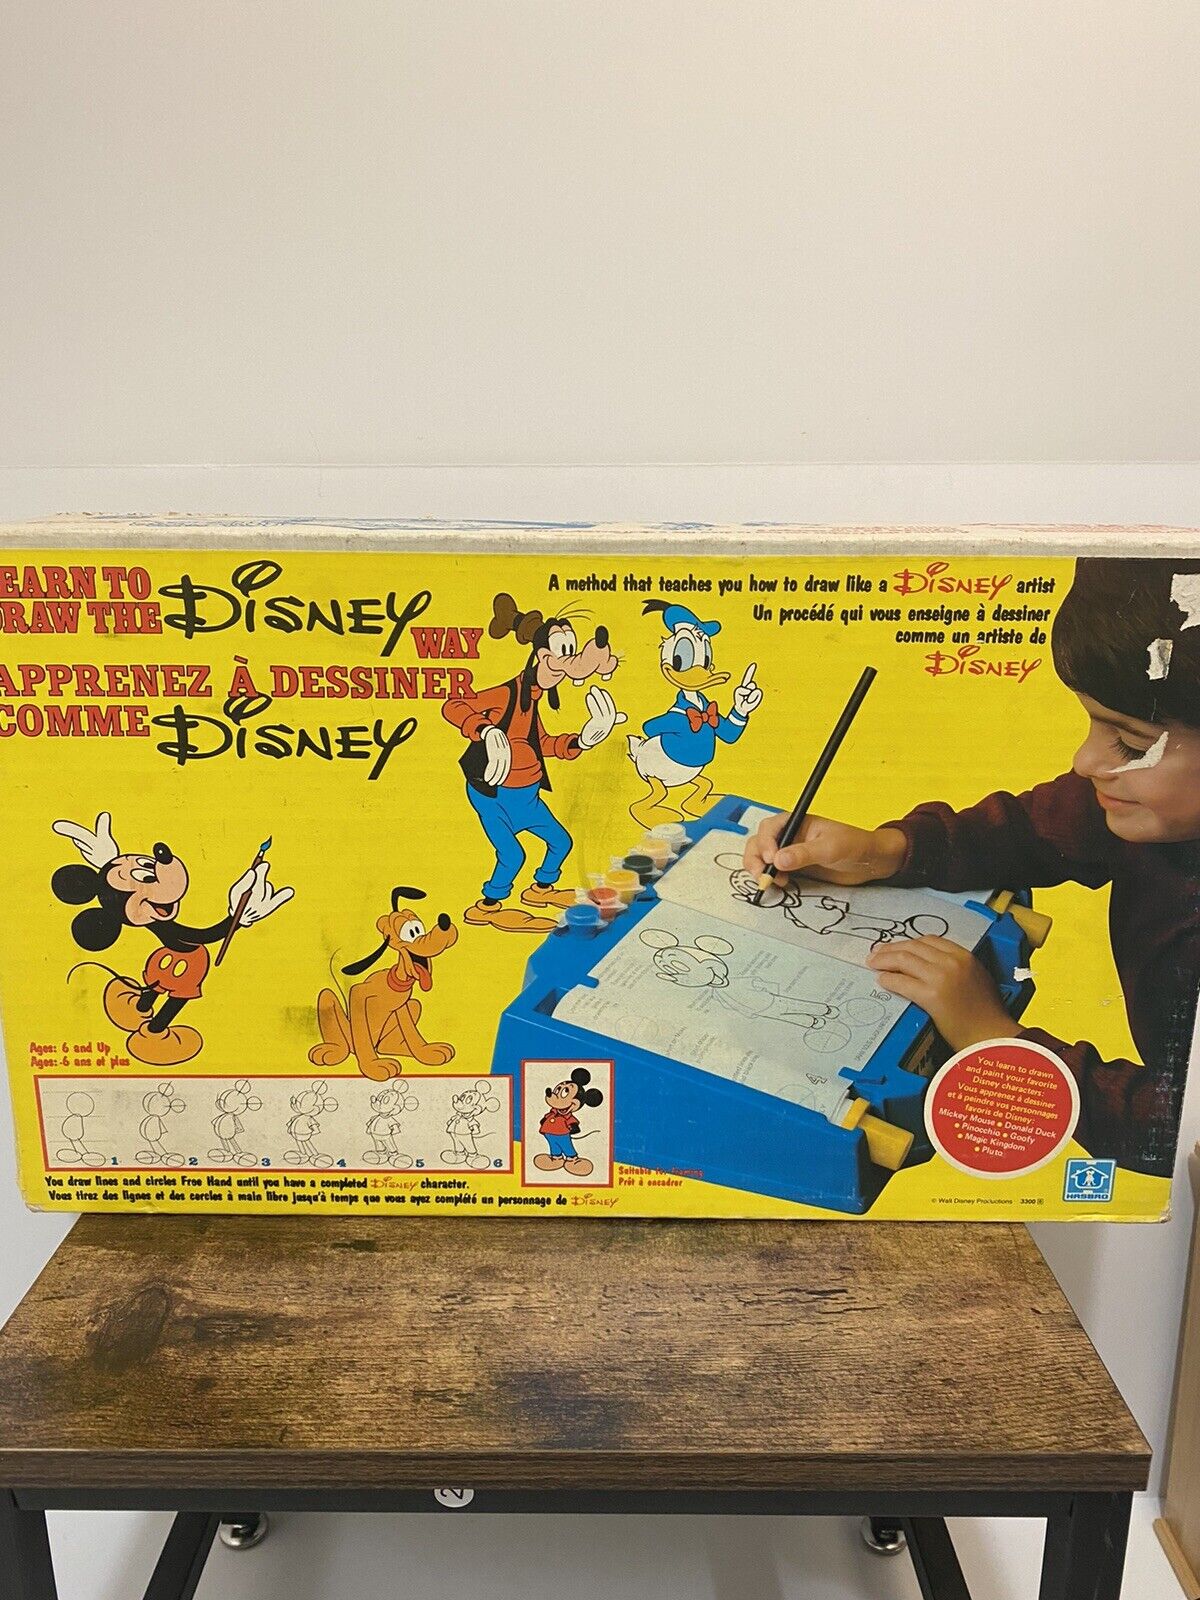 Vintage Hasbro Learn To Draw The Disney Way 1981 Drawing Board Toy